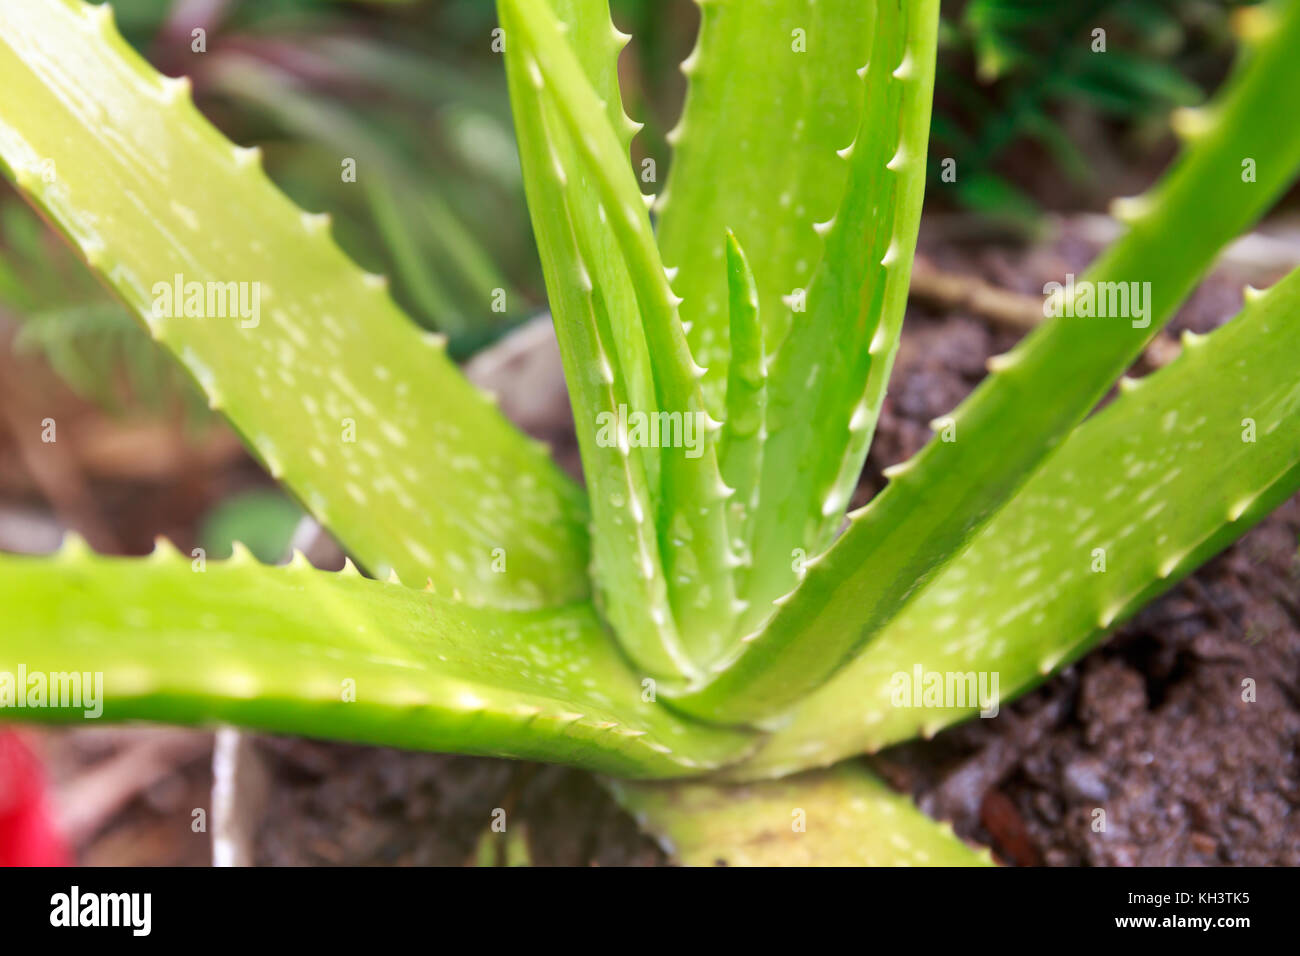 Aloe Vera Is Growing from a Pot of Fertile Soil in Asia Tropical Area During Springtime. Stock Photo